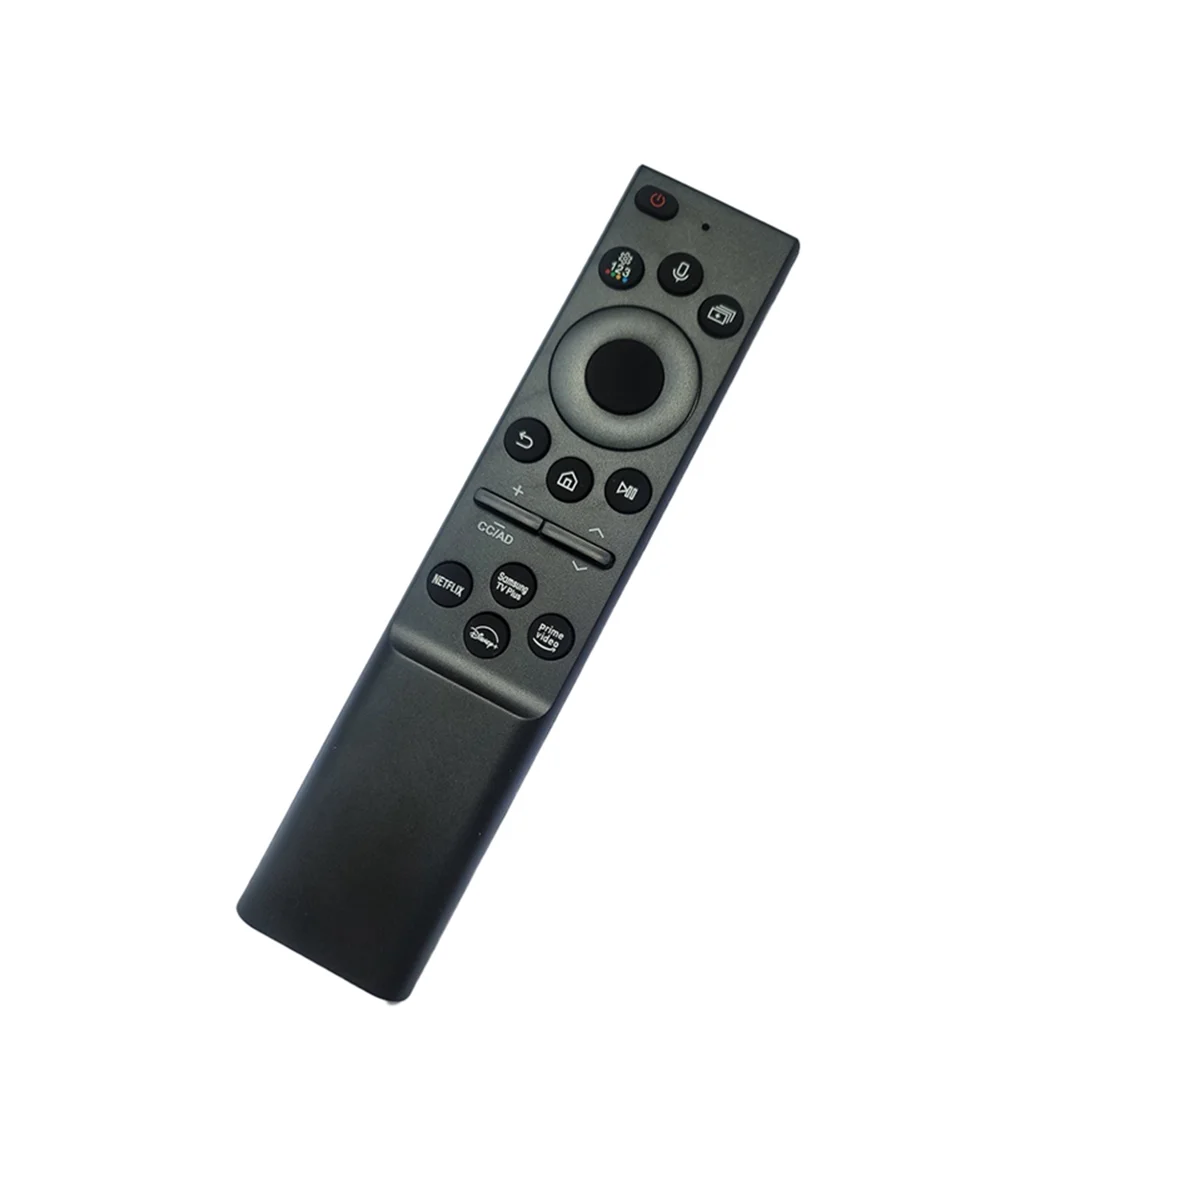 

BN59-01385A Voice Remote Control for Samsung Smart 4K BN59-01432J BN59-01385A QLED OLED Frame and Crystal UHD Series